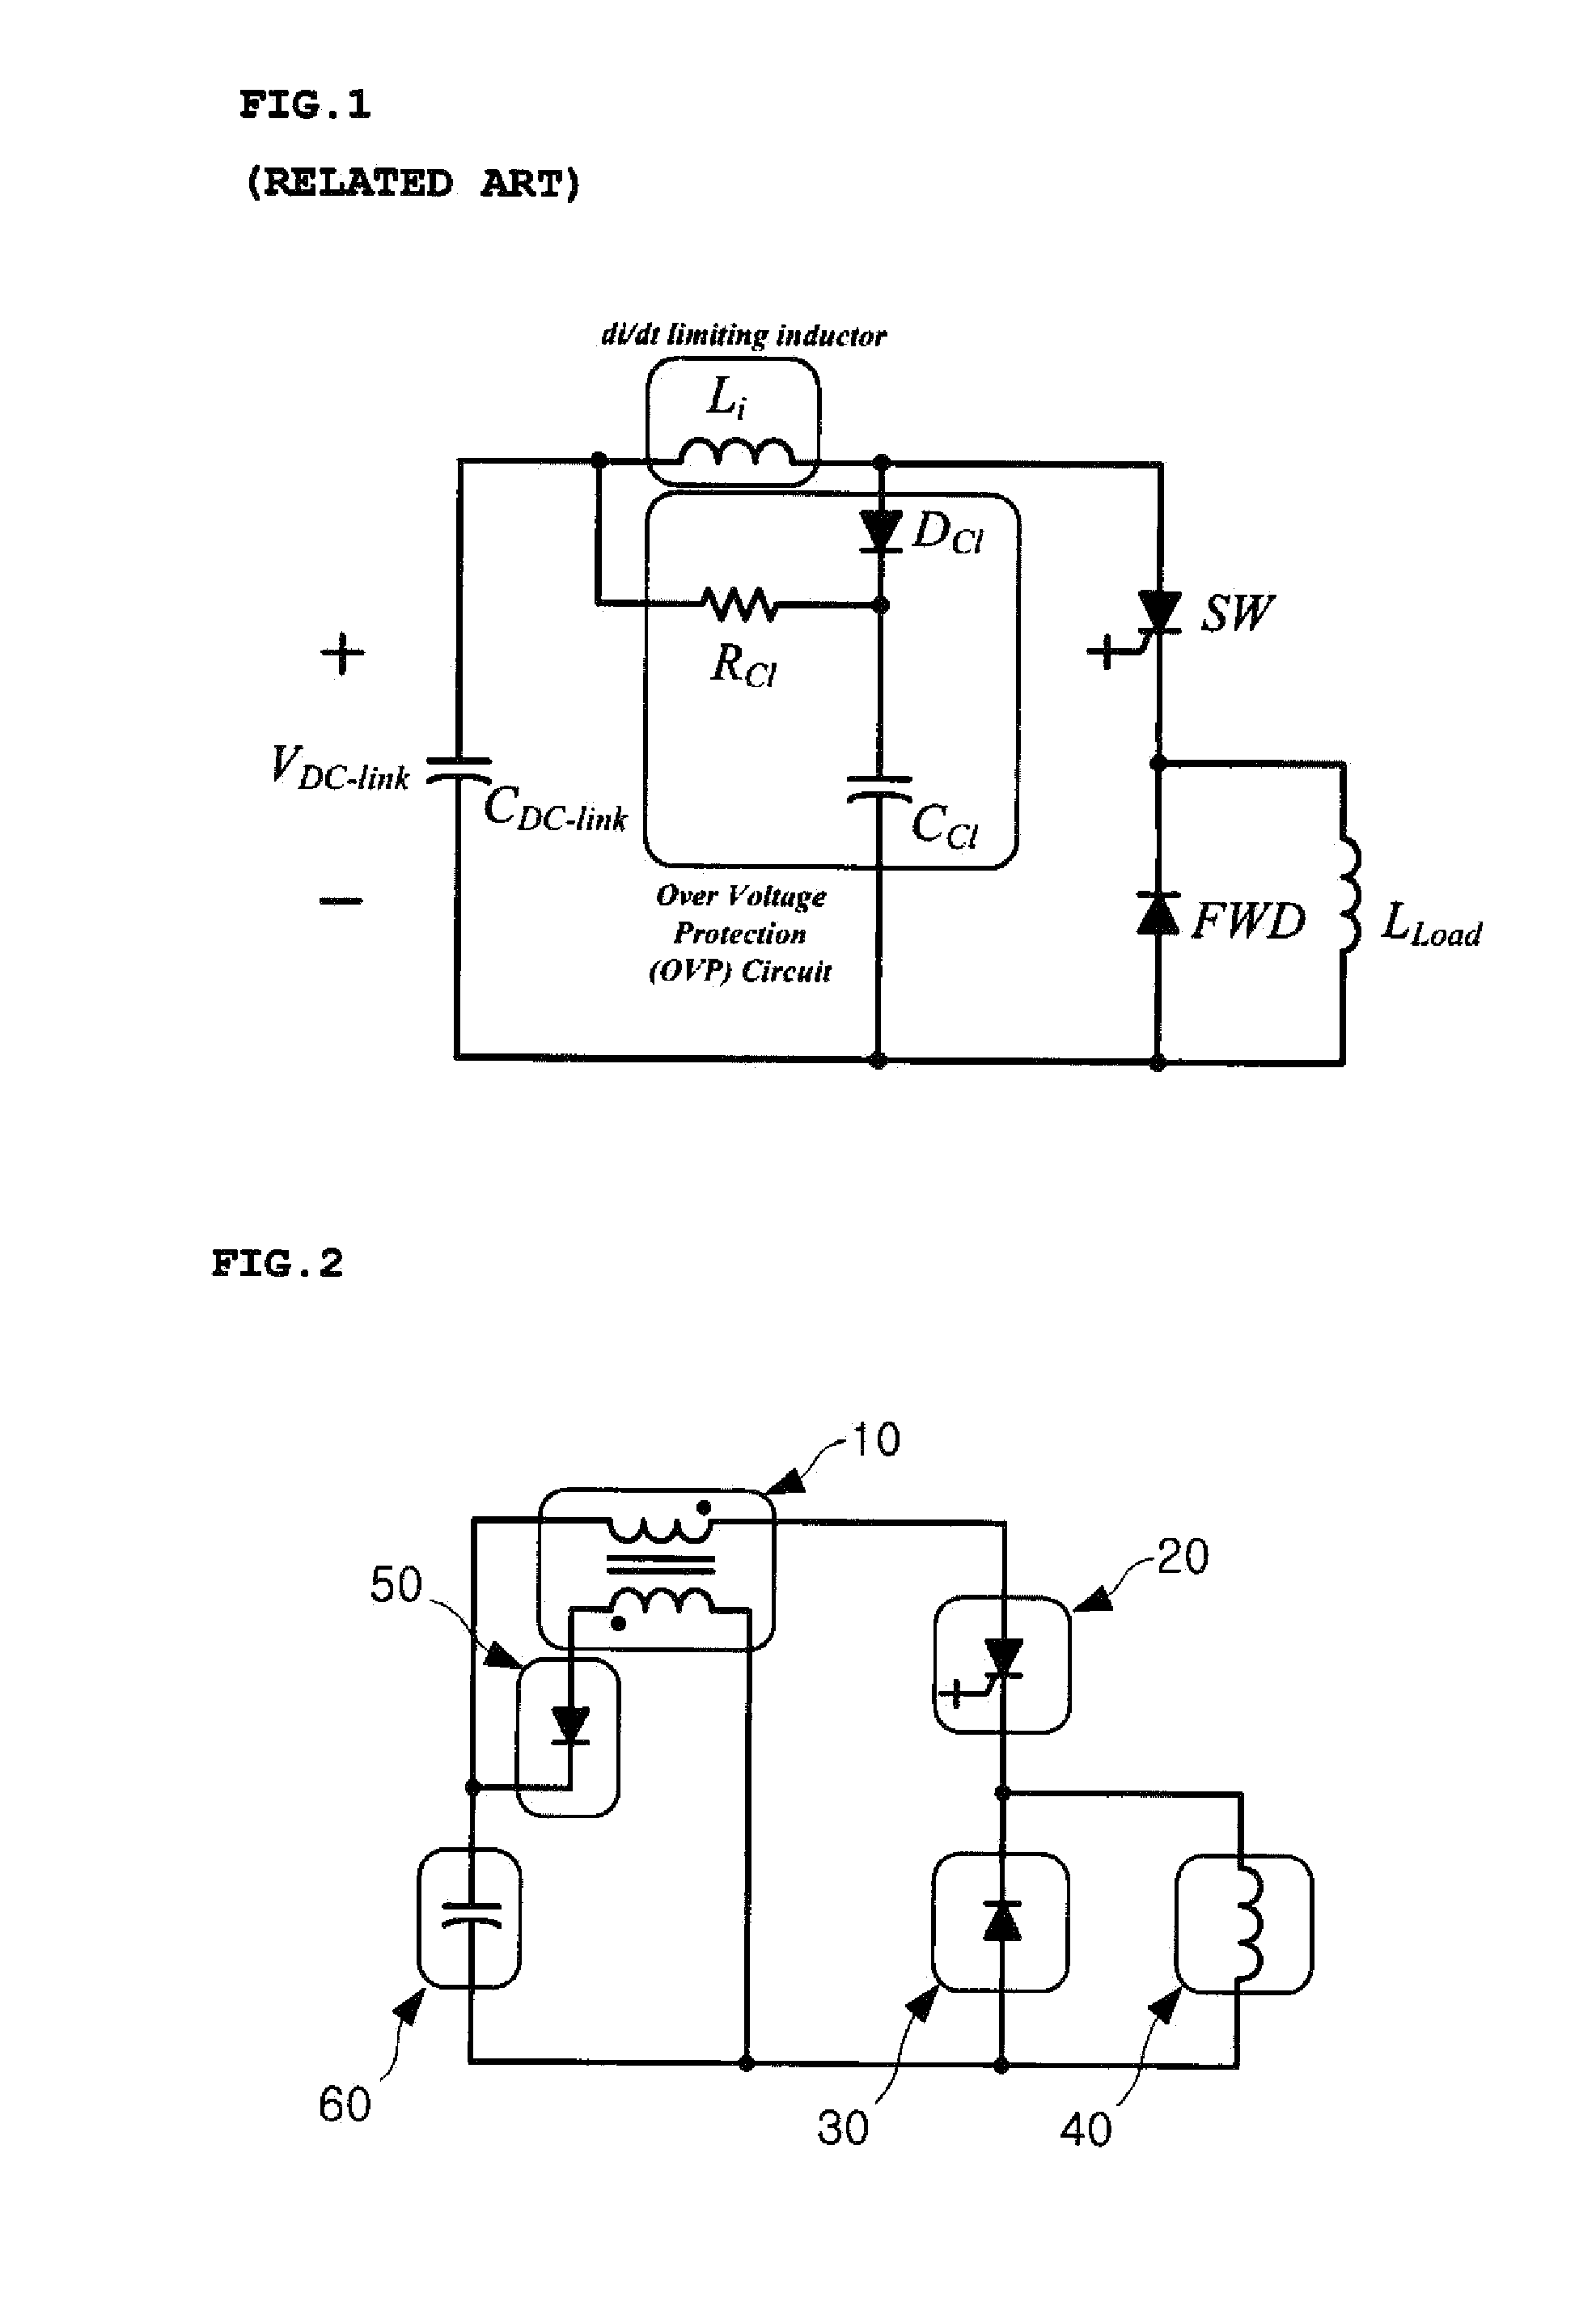 Flyback type snubber circuit